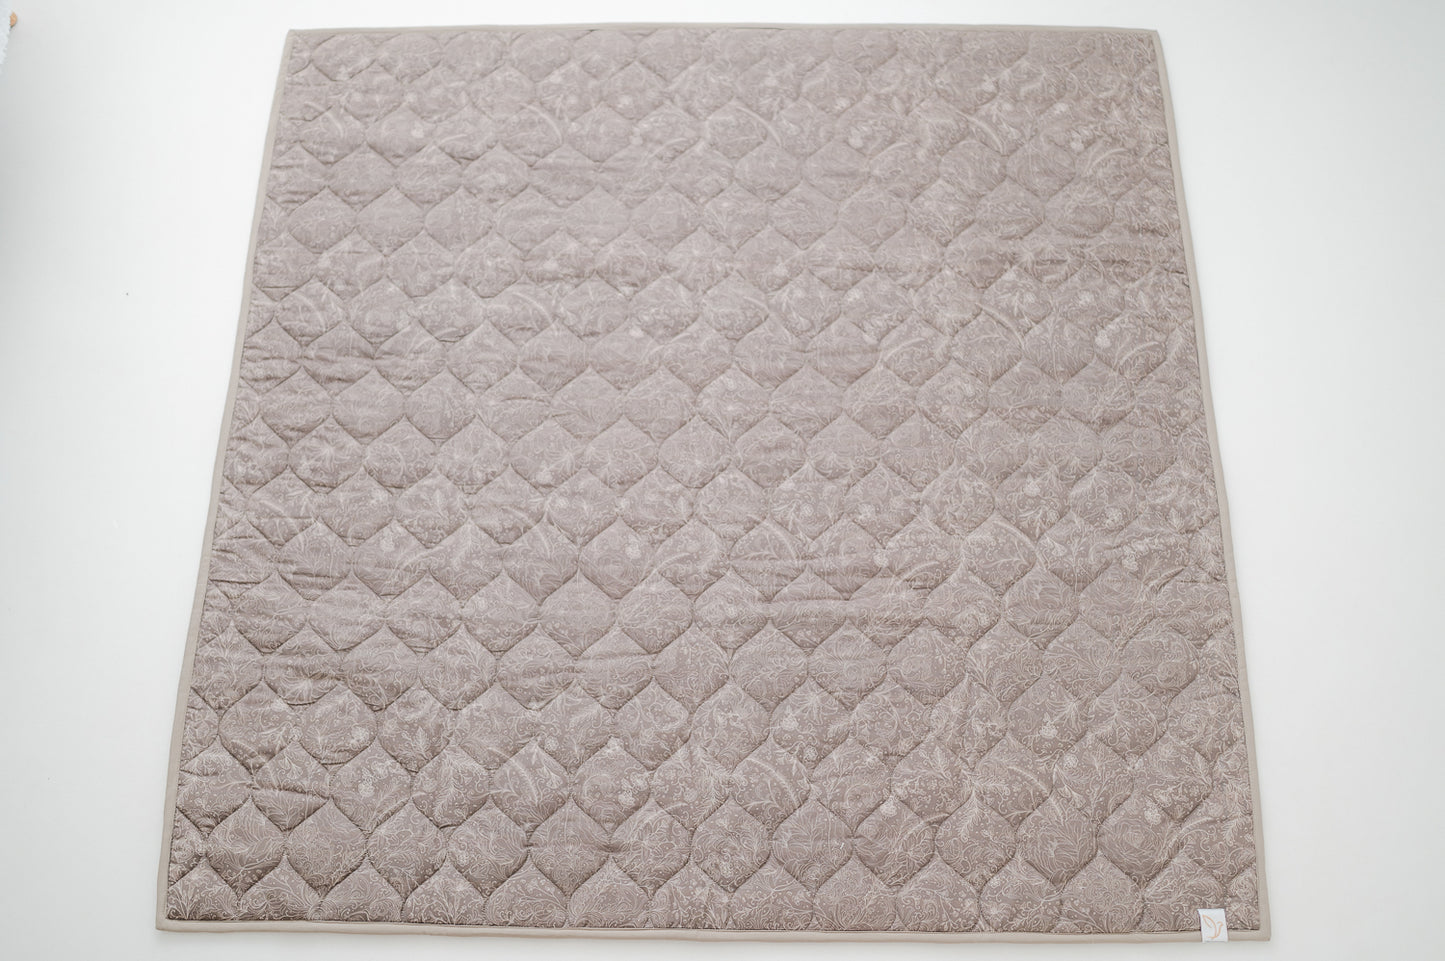 Lovely Lines Royal Quilted Playmat